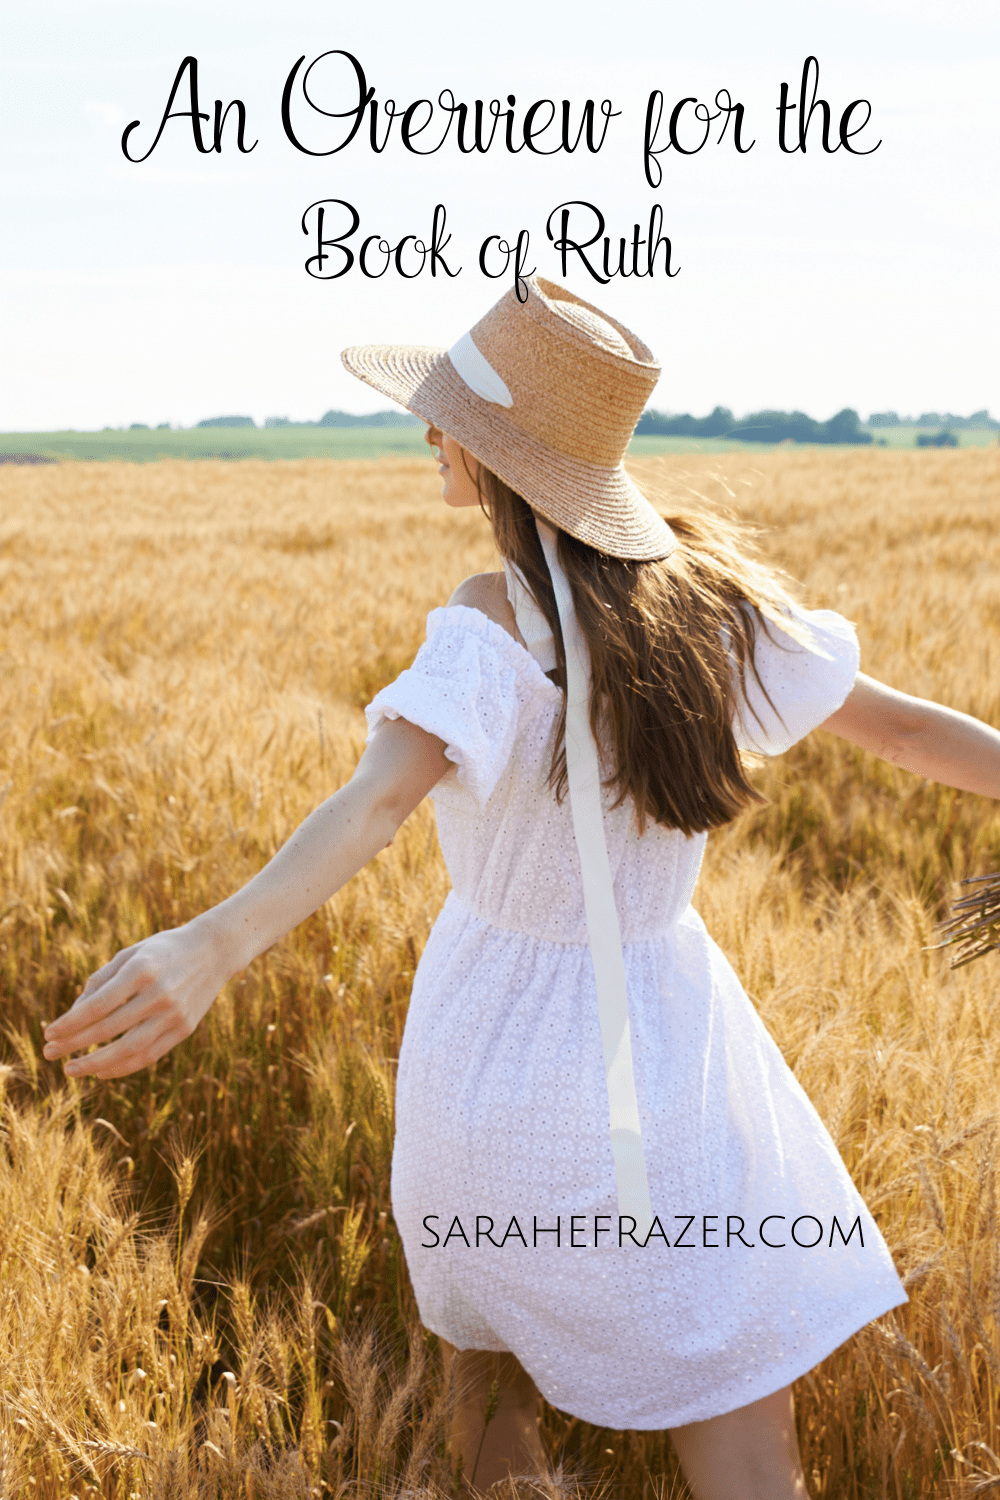 book of ruth quotes